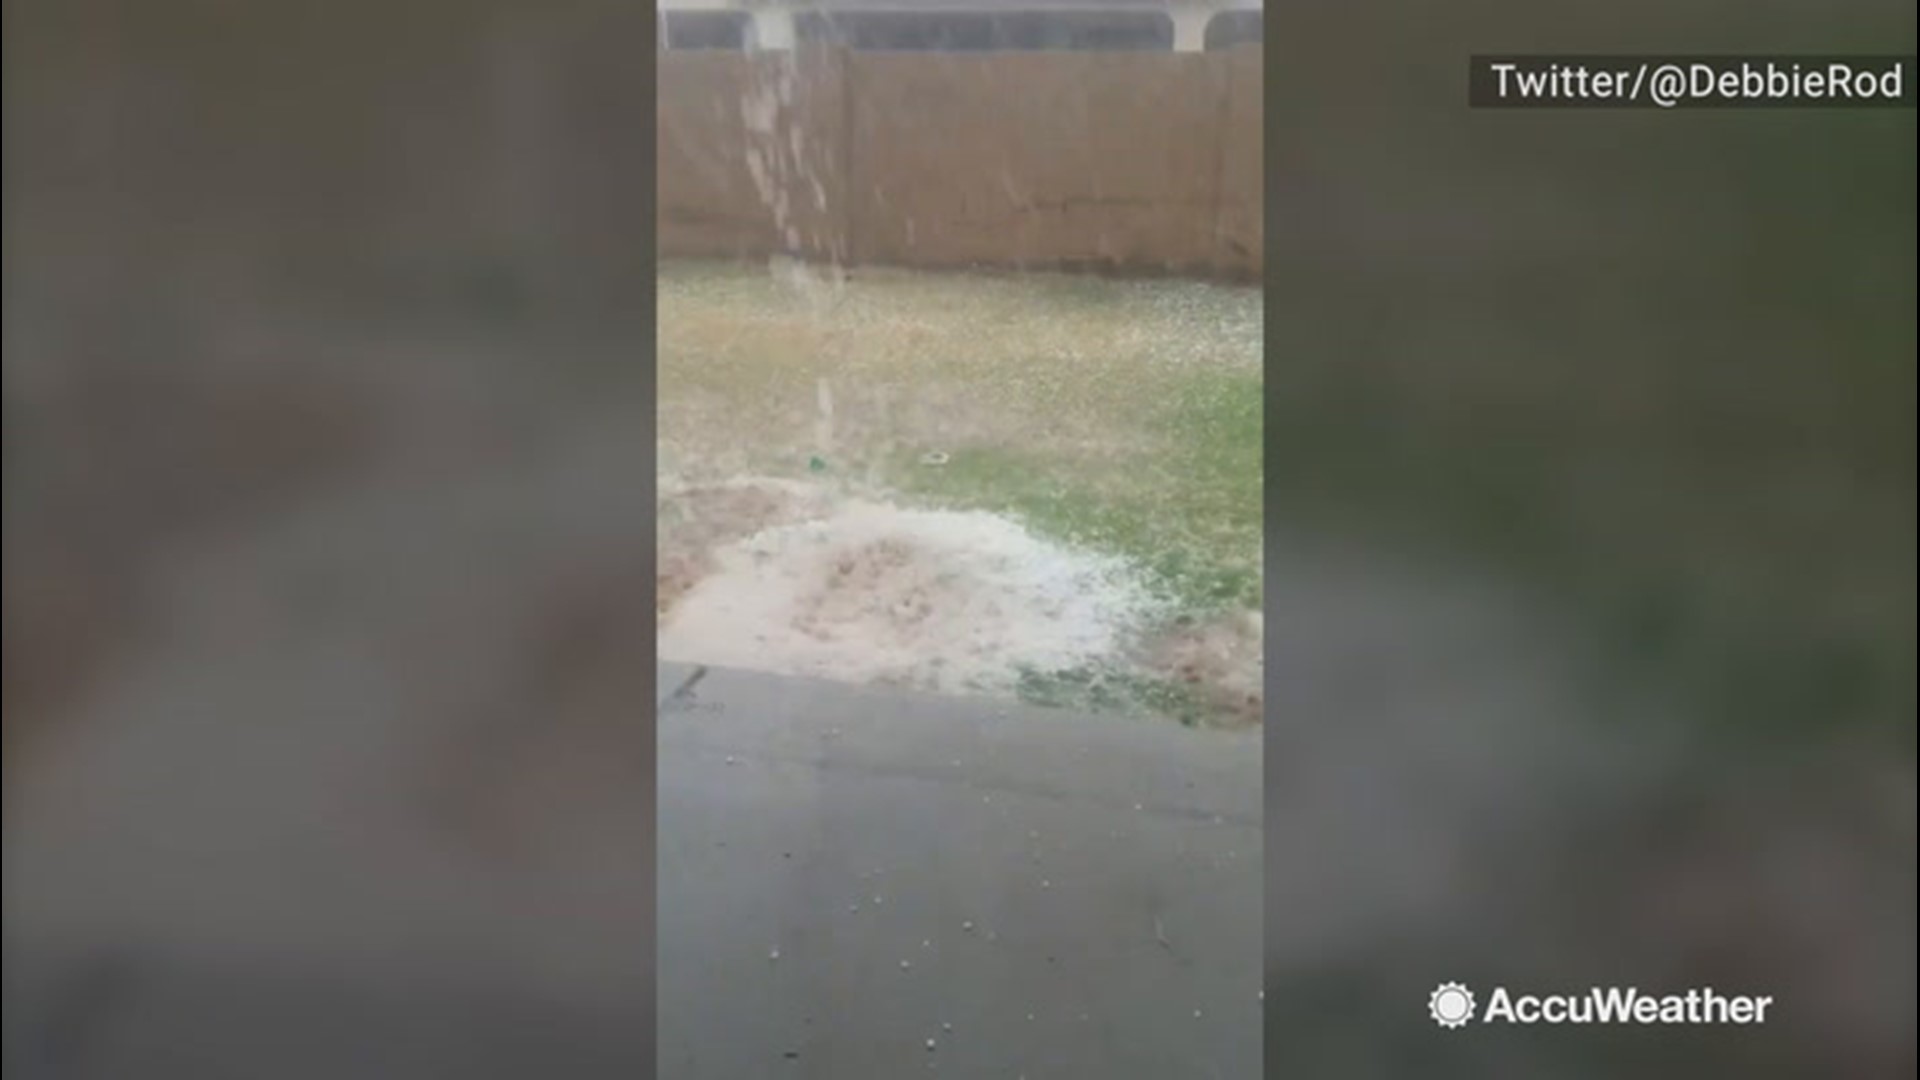 On Nov. 21, a ridiculous amount of hail and rain fell on Phoenix, Arizona. Lawns looked like mud pits at the end of the day.